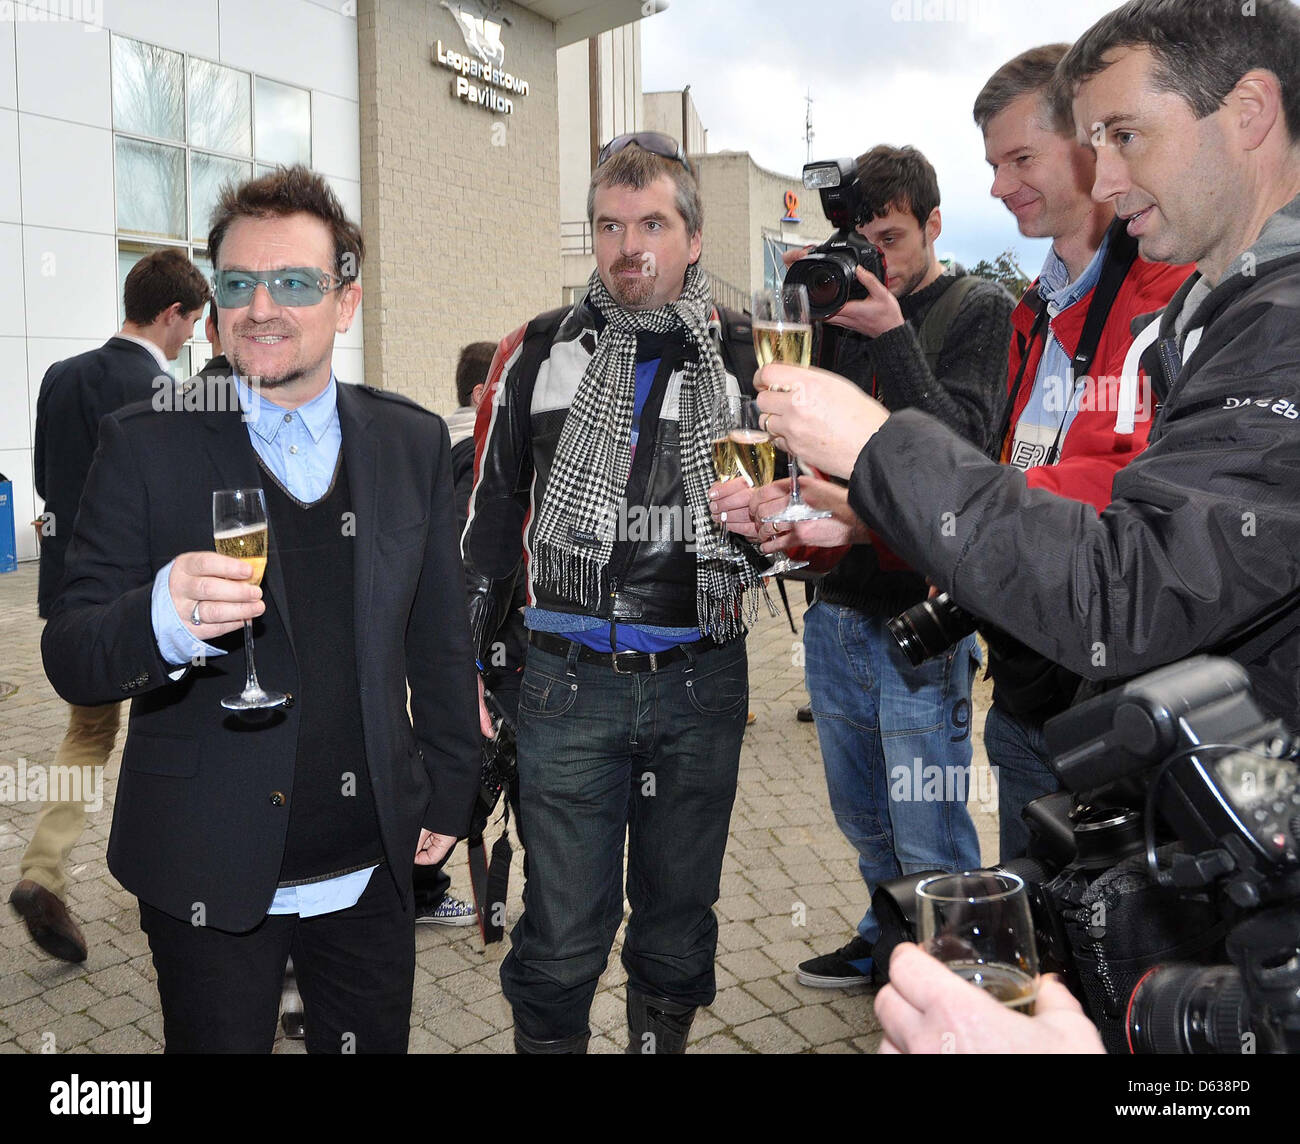 Ali Hewson, Bono Guests are spotted on the first day of the Christmas Leopardstown Races Dublin, Ireland - 26.12.11 Stock Photo